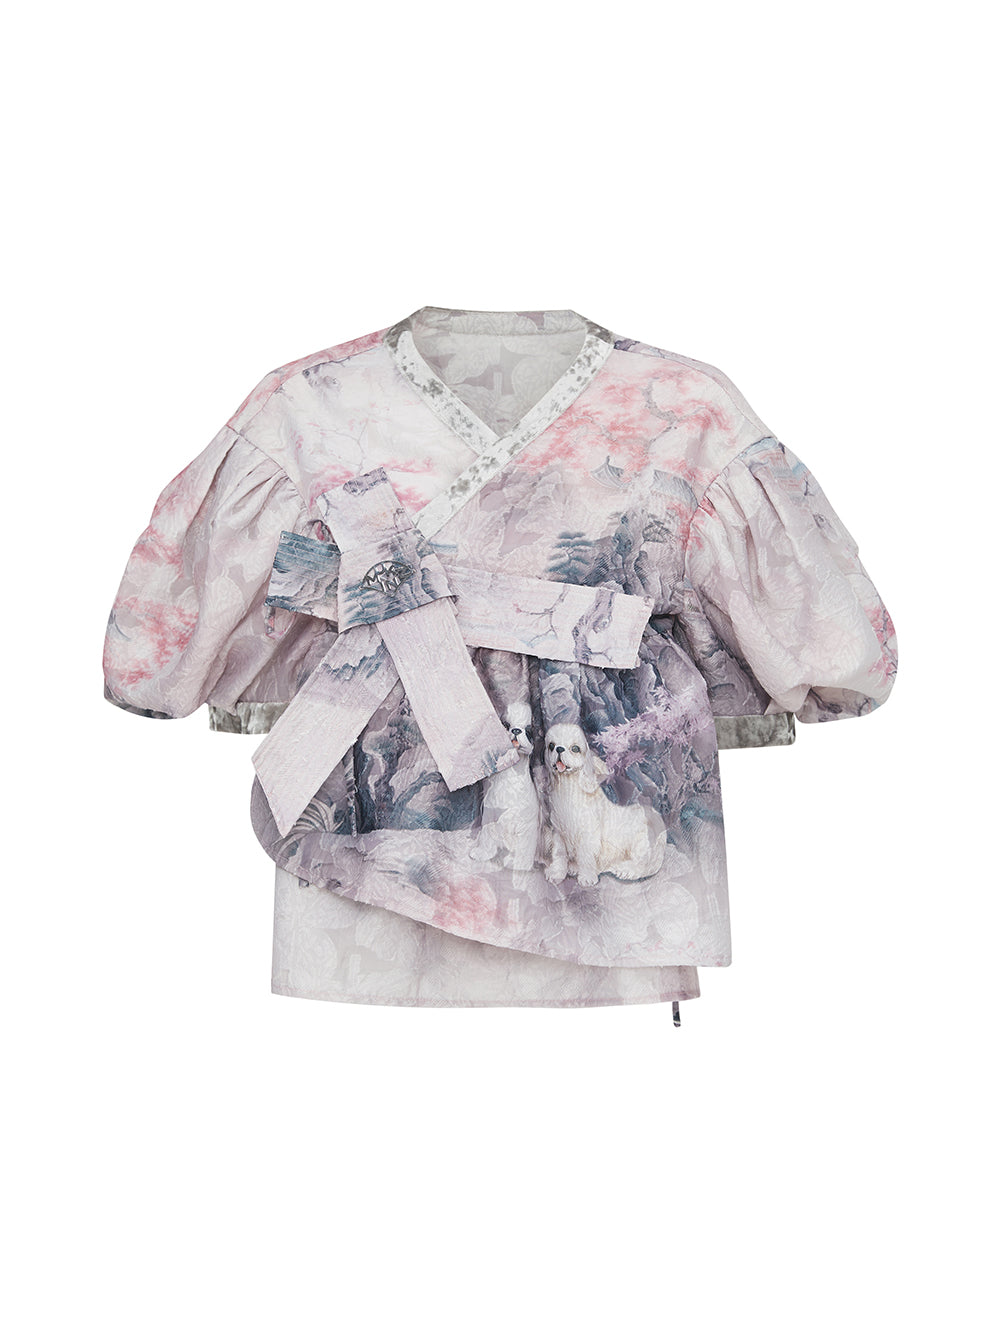 MUKZIN New Original All-match T-shirt with Bow Puff Sleeves